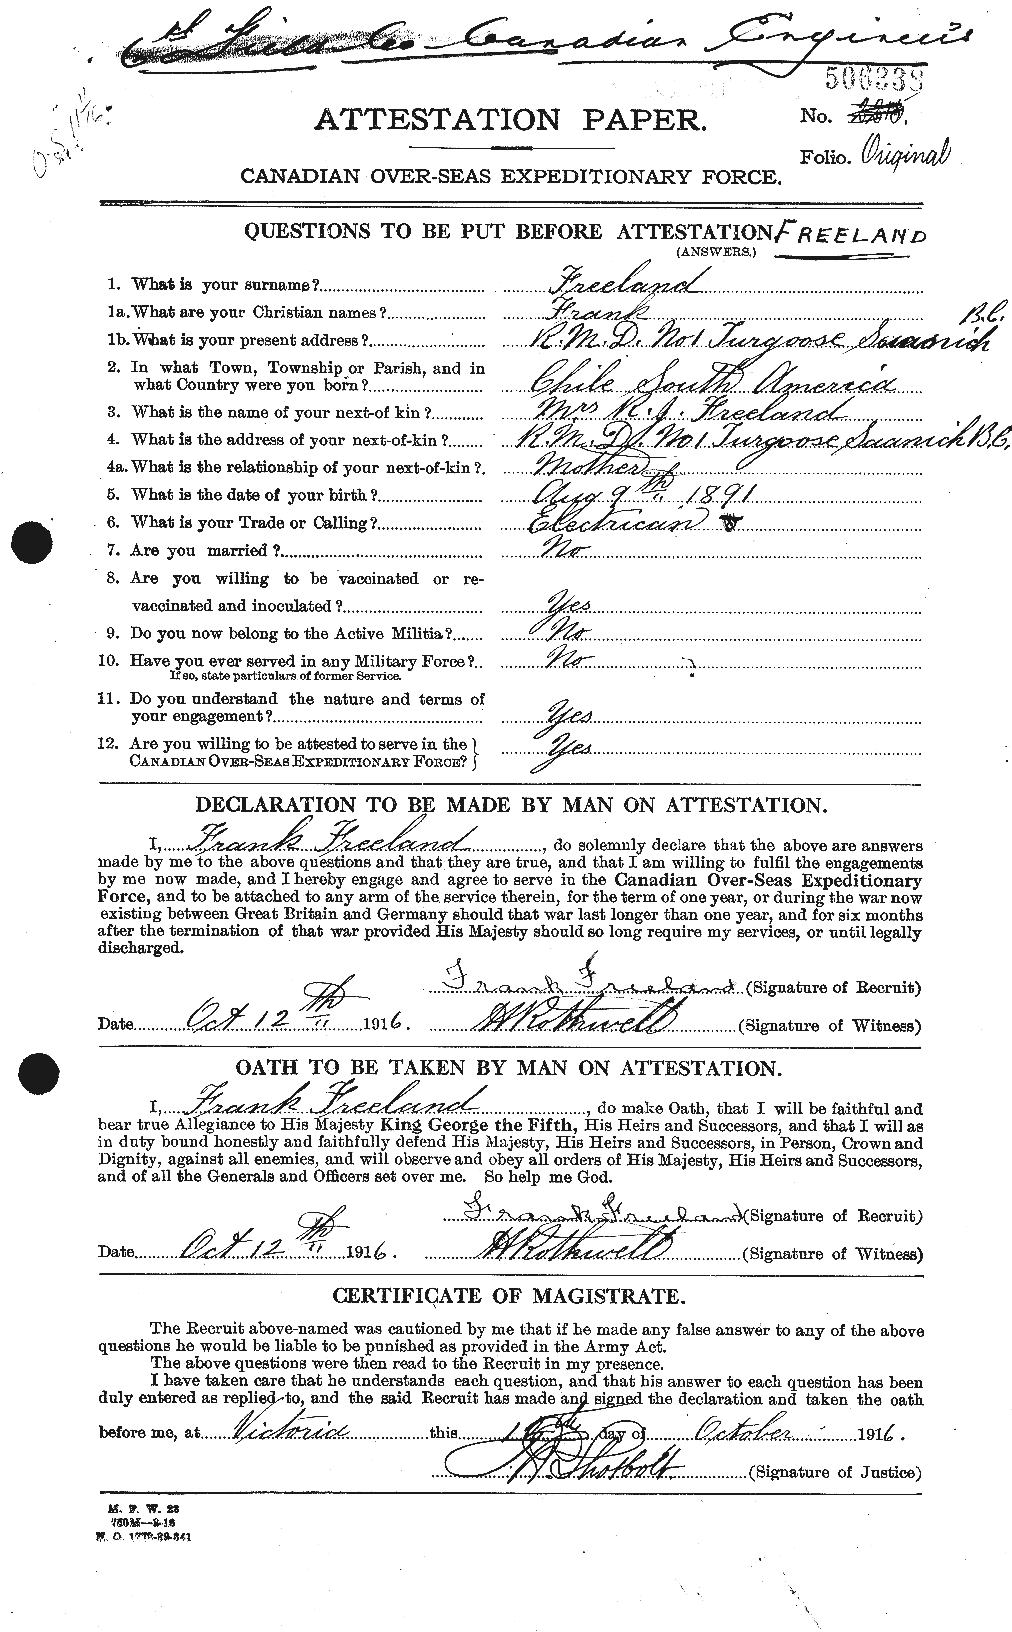 Personnel Records of the First World War - CEF 336338a